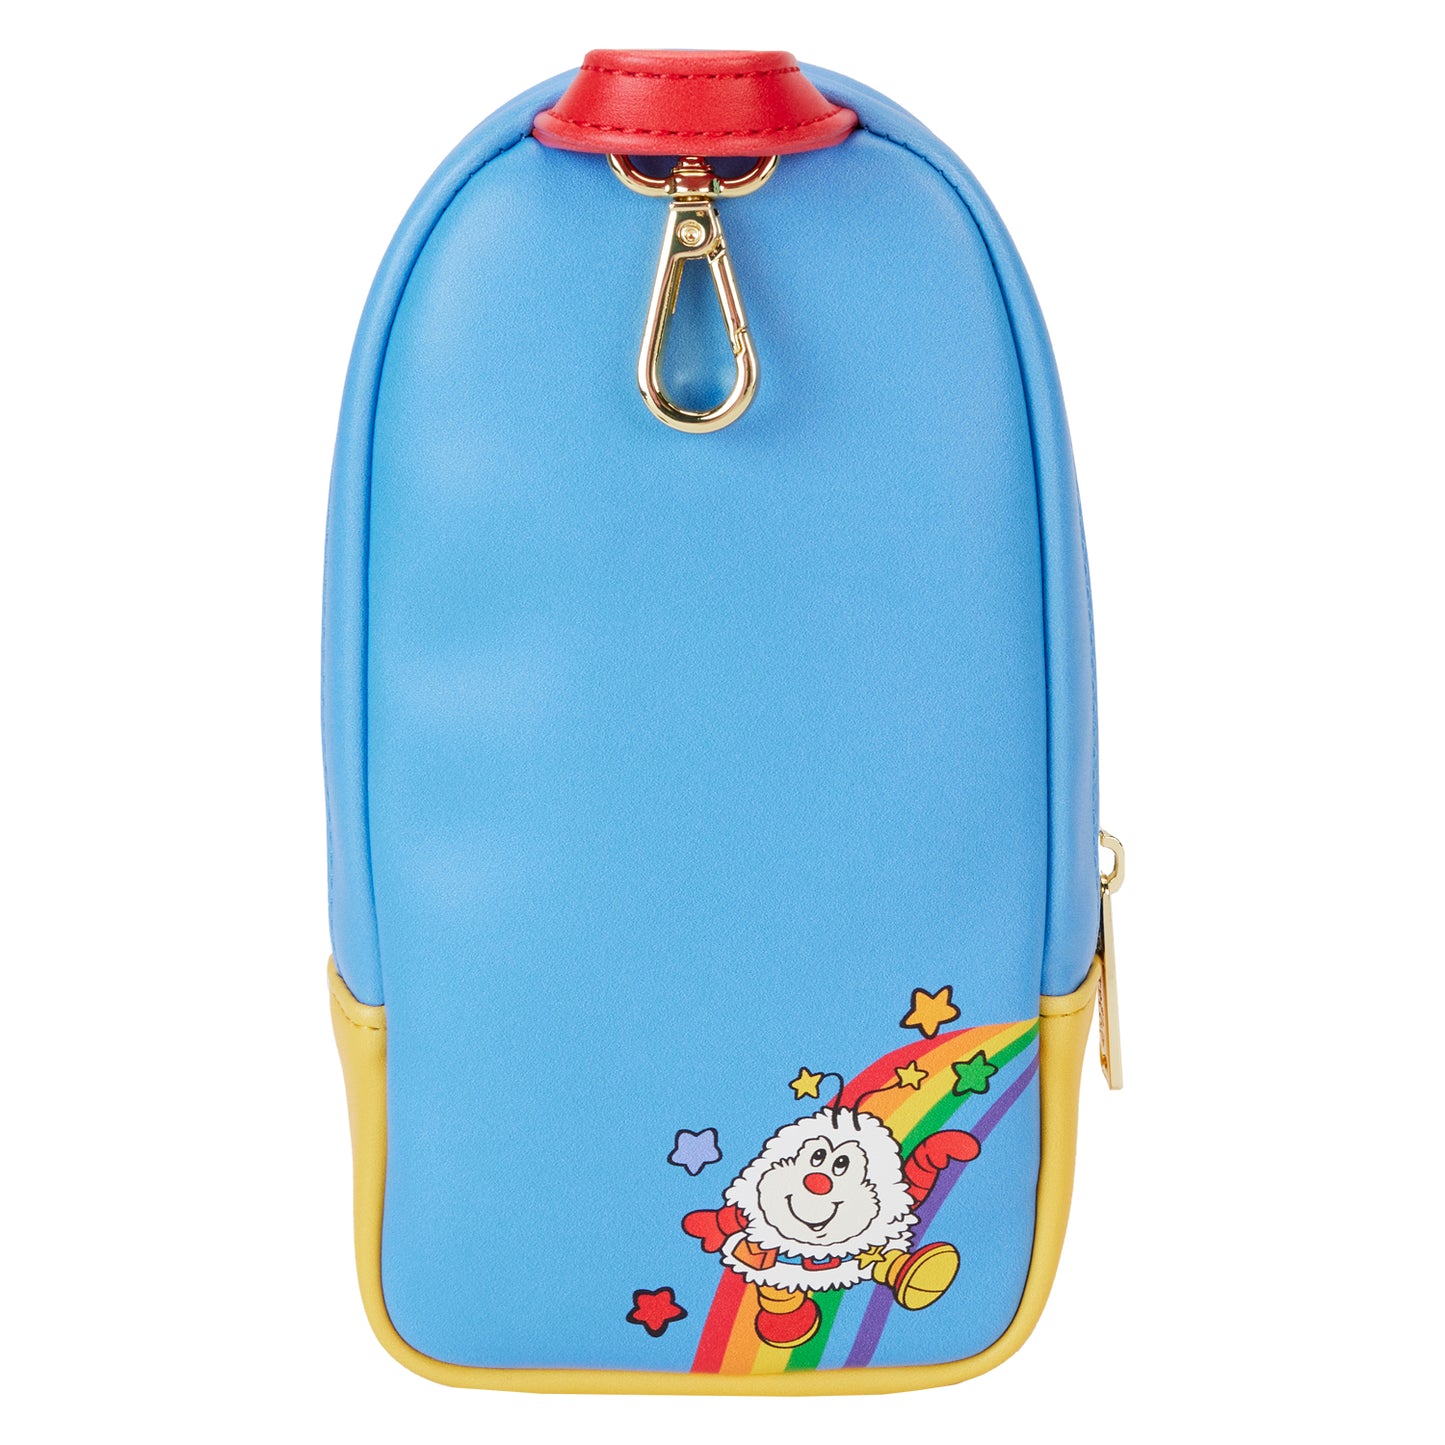 Rainbow Brite™ Color Castle Stationery Mini Backpack Pencil Case - PREORDER